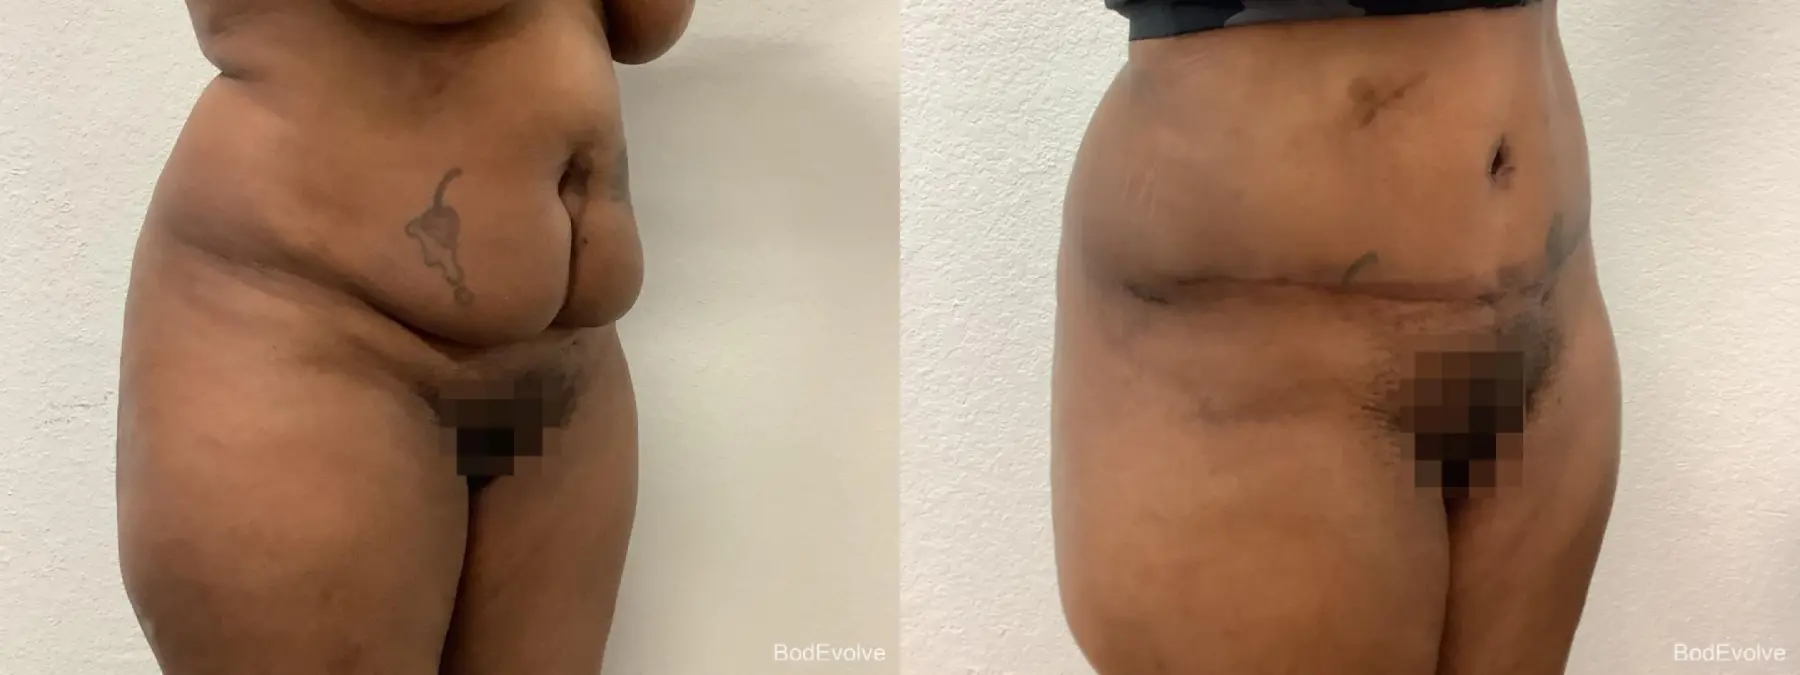 Tummy Tuck: Patient 3 - Before and After 2